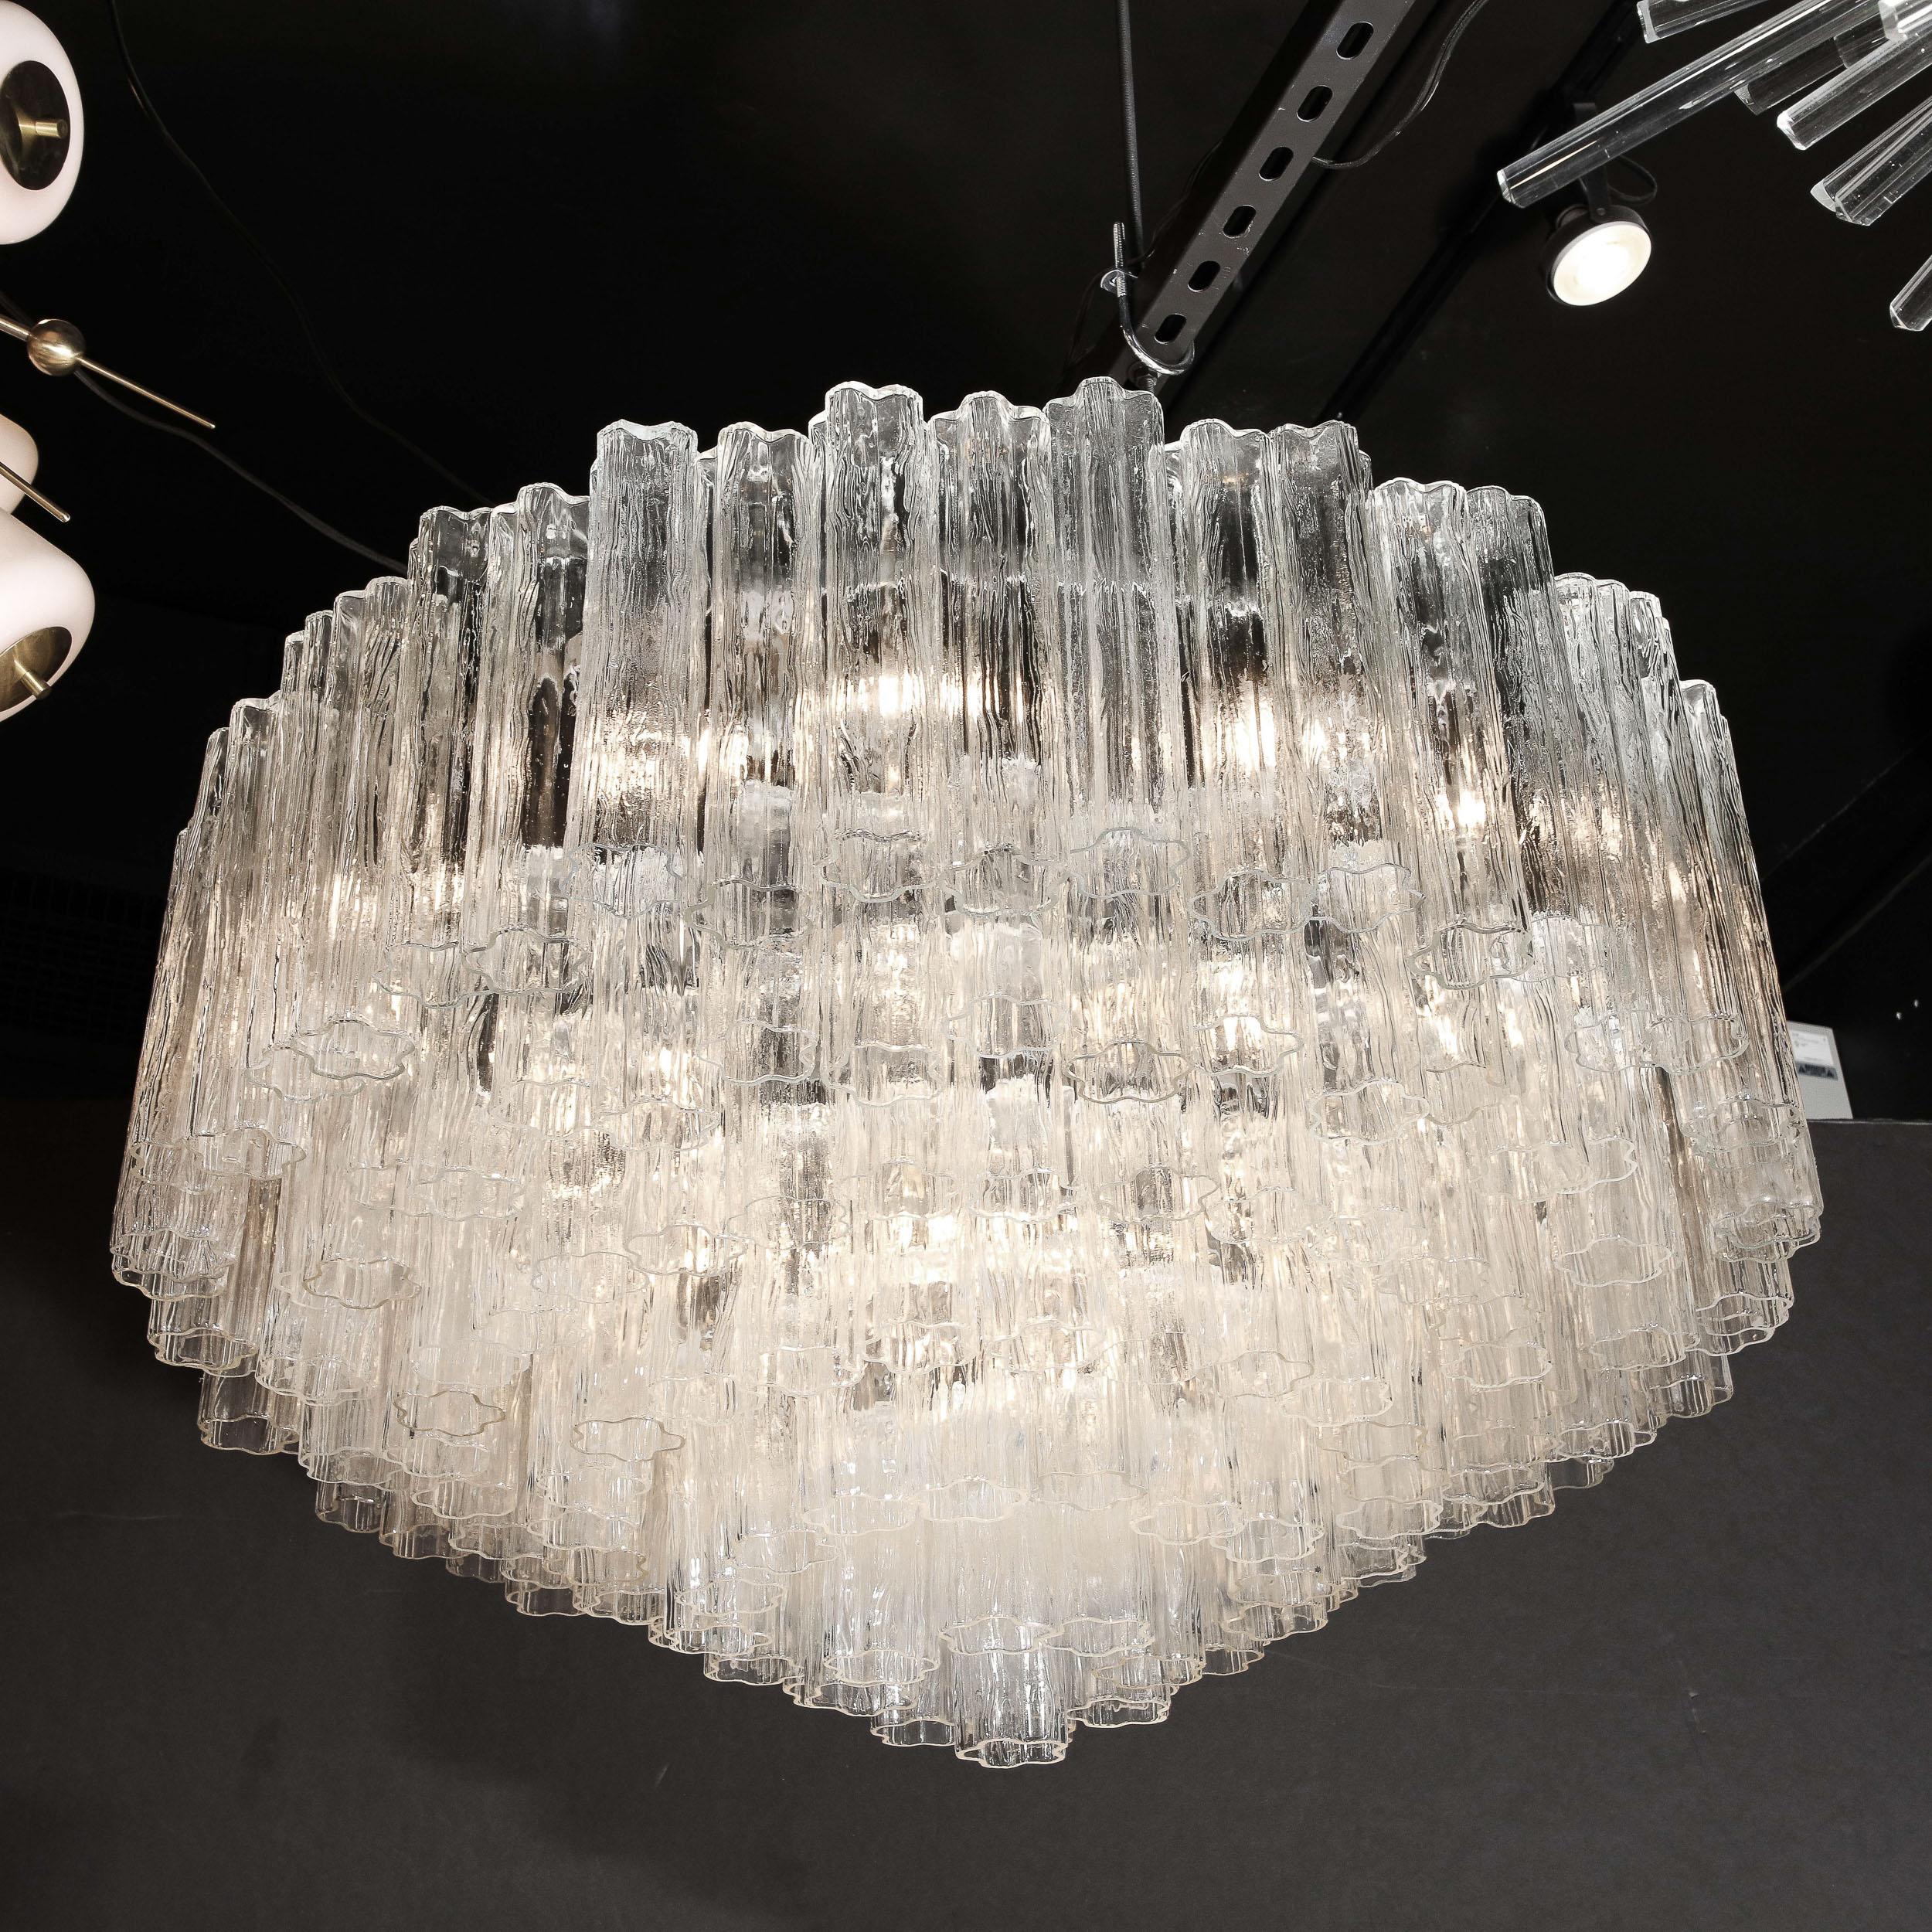 Late 20th Century Mid-Century Modernist Seven Tier Tronchi Chandelier in Transparent Murano Glass For Sale